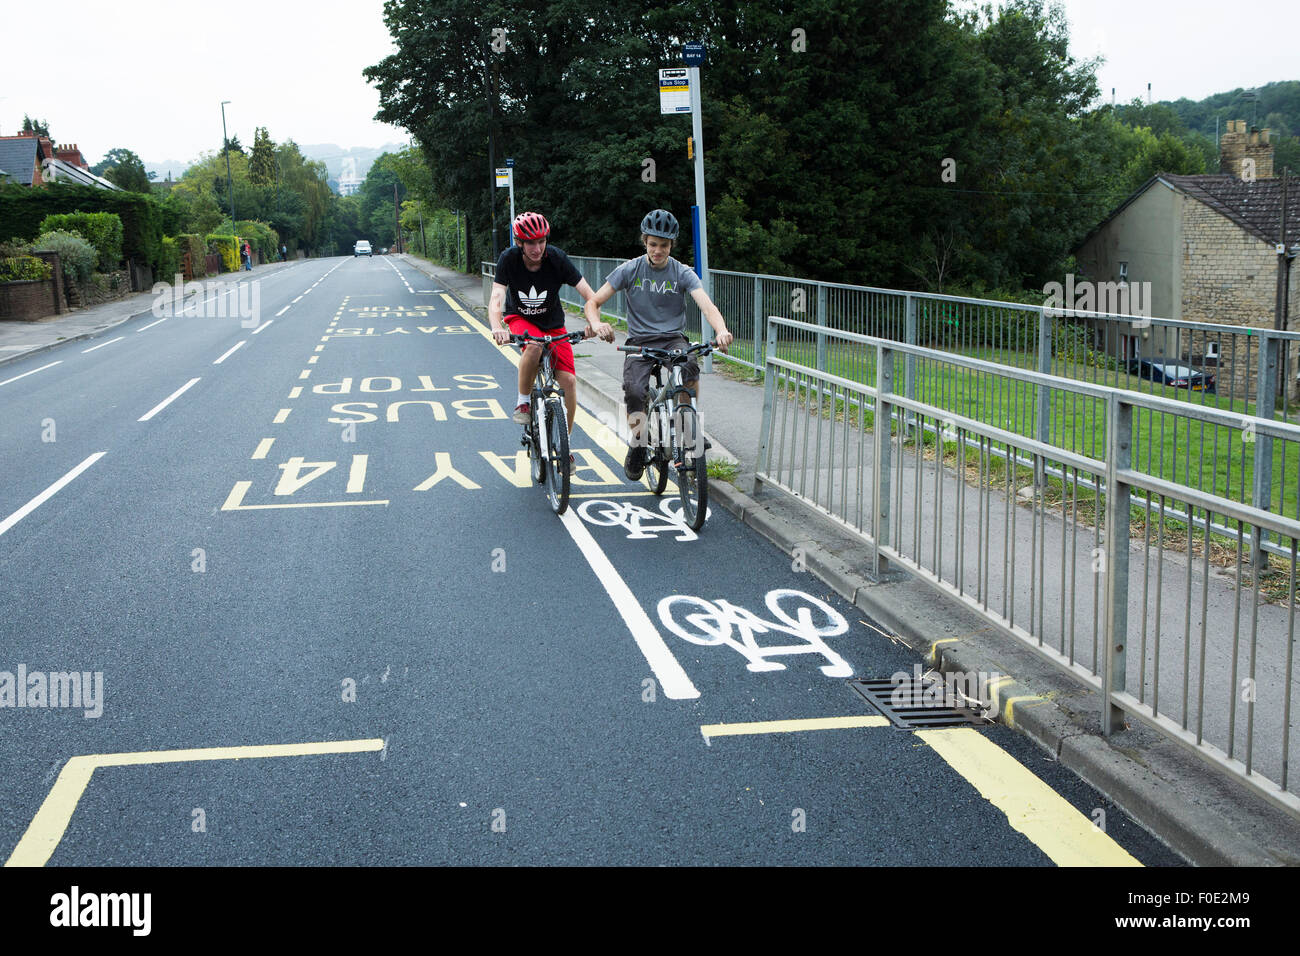 Stroud, UK. 11th Aug, 2015. Britain's shortest cycle lane is painted on a newly tarmacced road between two school bus stops. The lane is opposite a local school to where children and teenagers rides their bikes. Stroud. Gloucestershire. United Kingdom. Credit:  Alexander Caminada/Alamy Live News Stock Photo